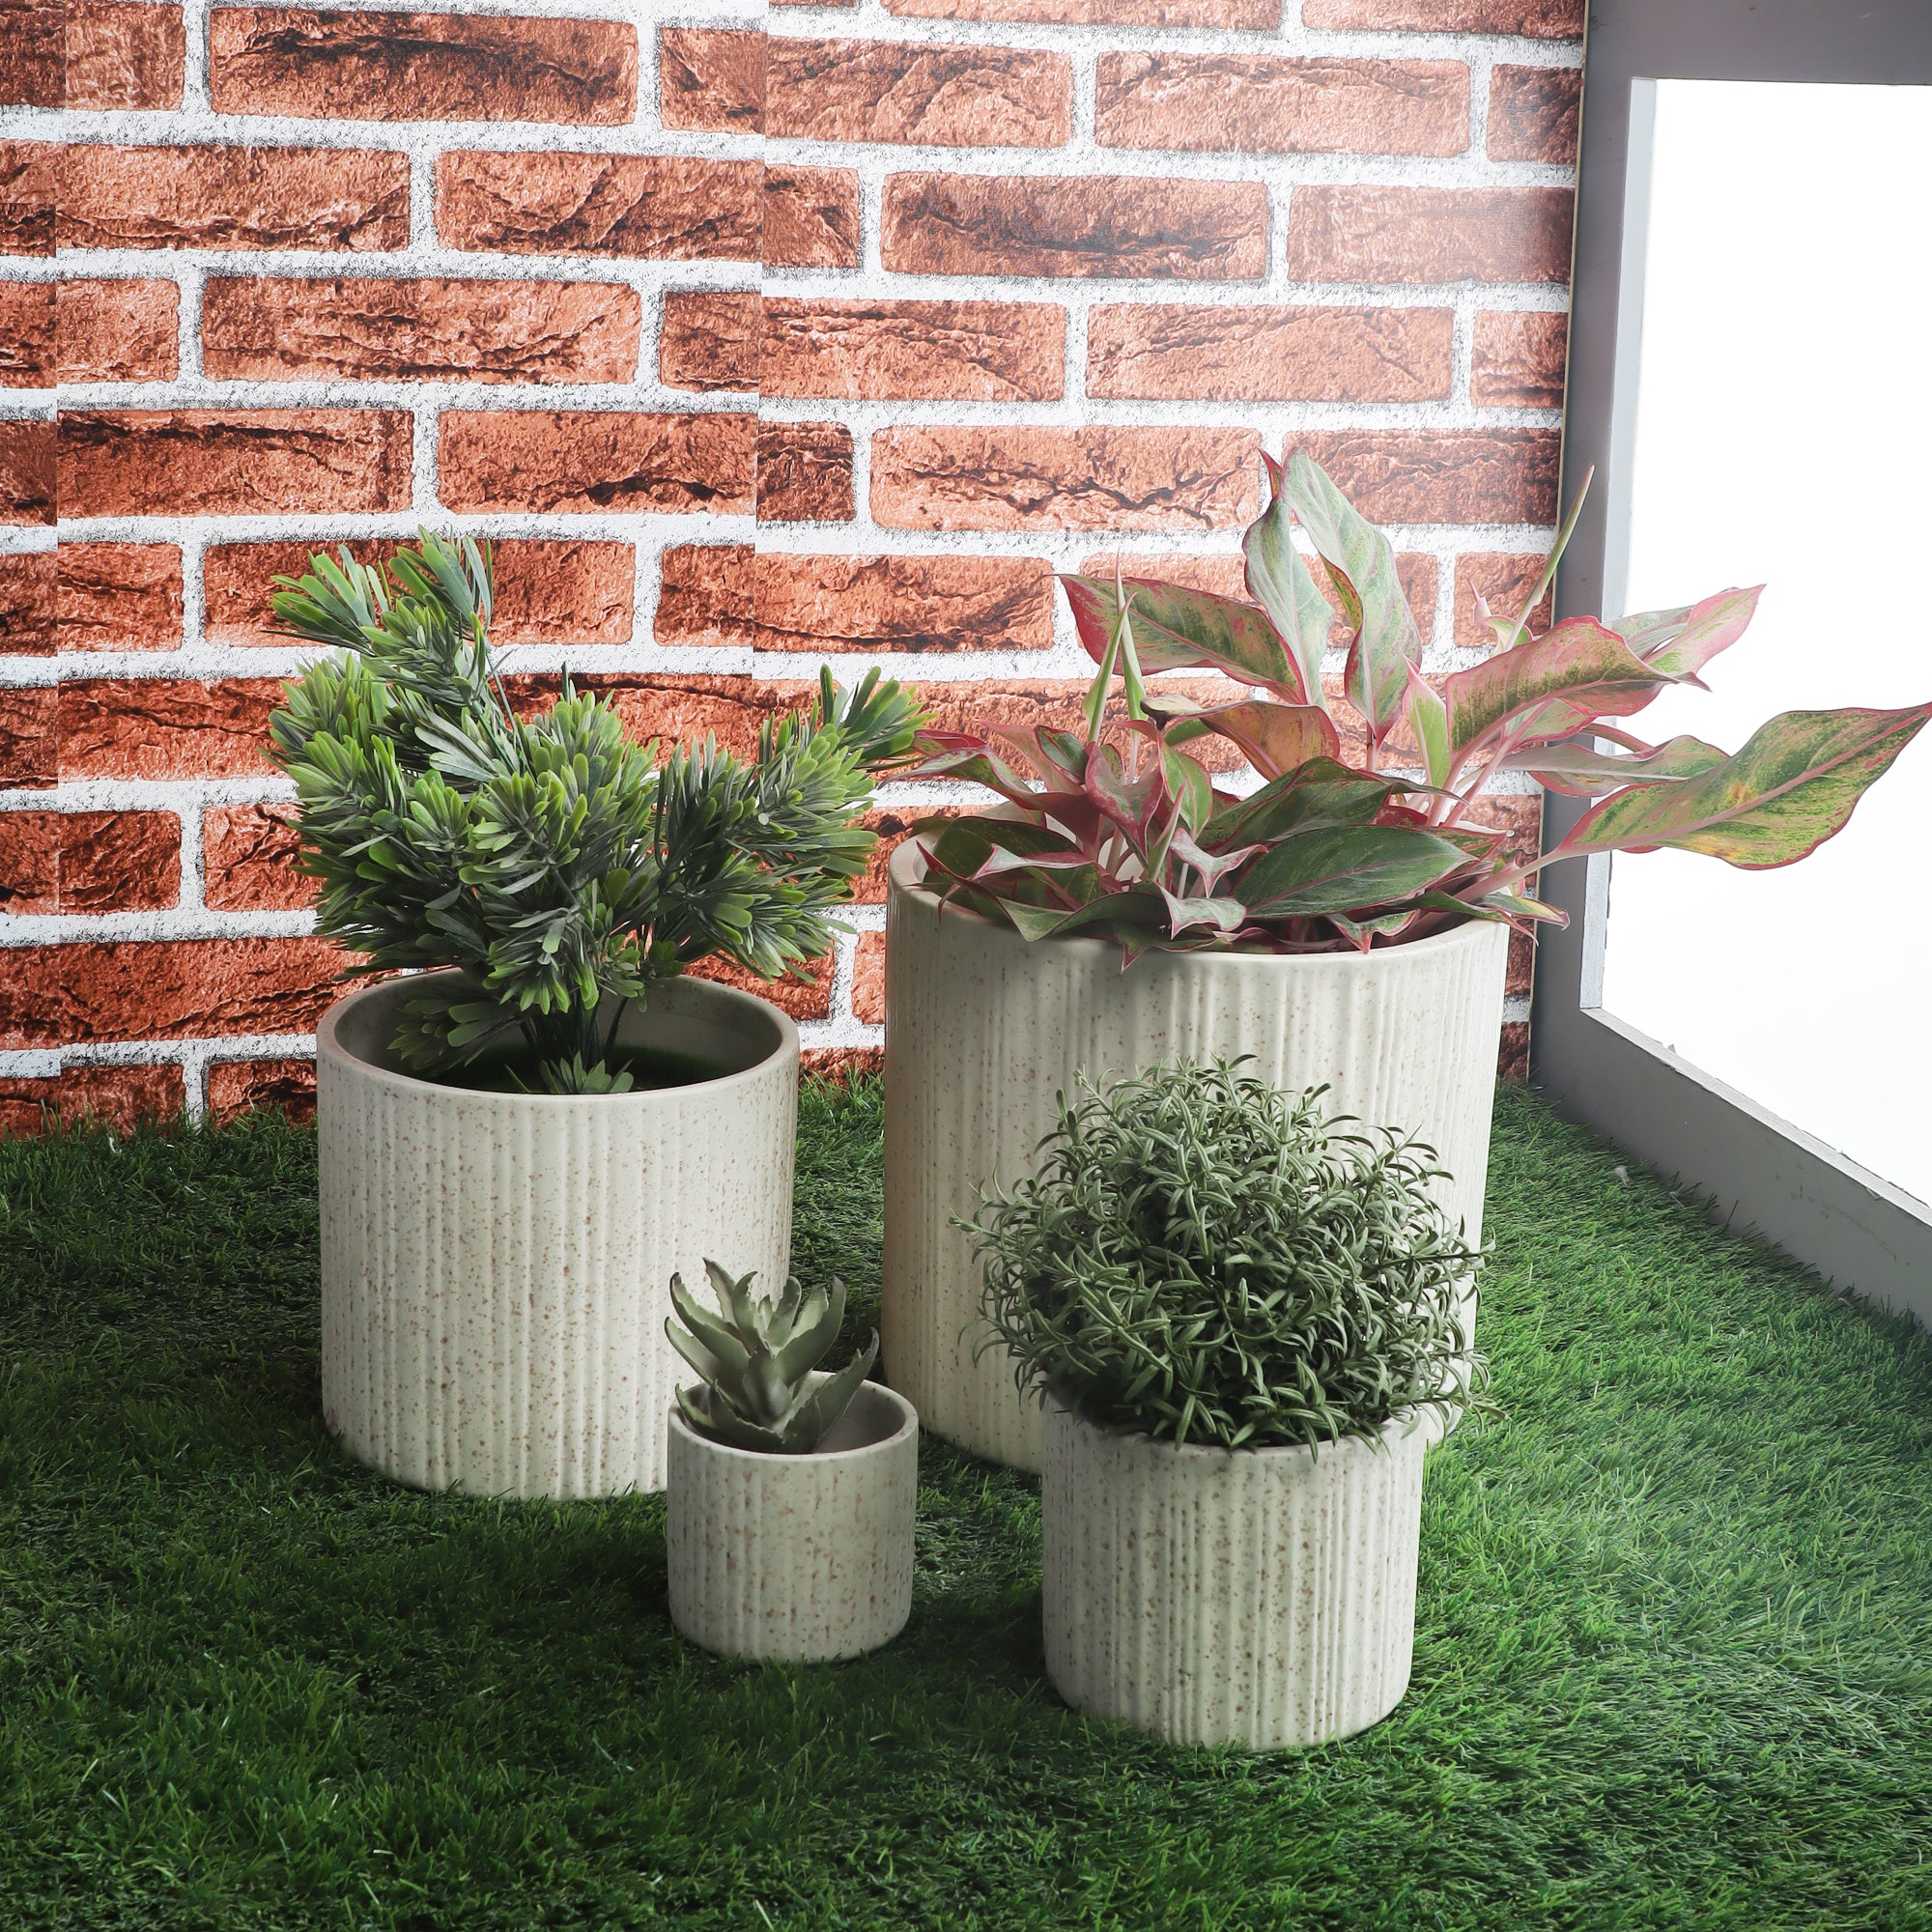 Pale Grey with Brown Texture Planters (Set of 4)